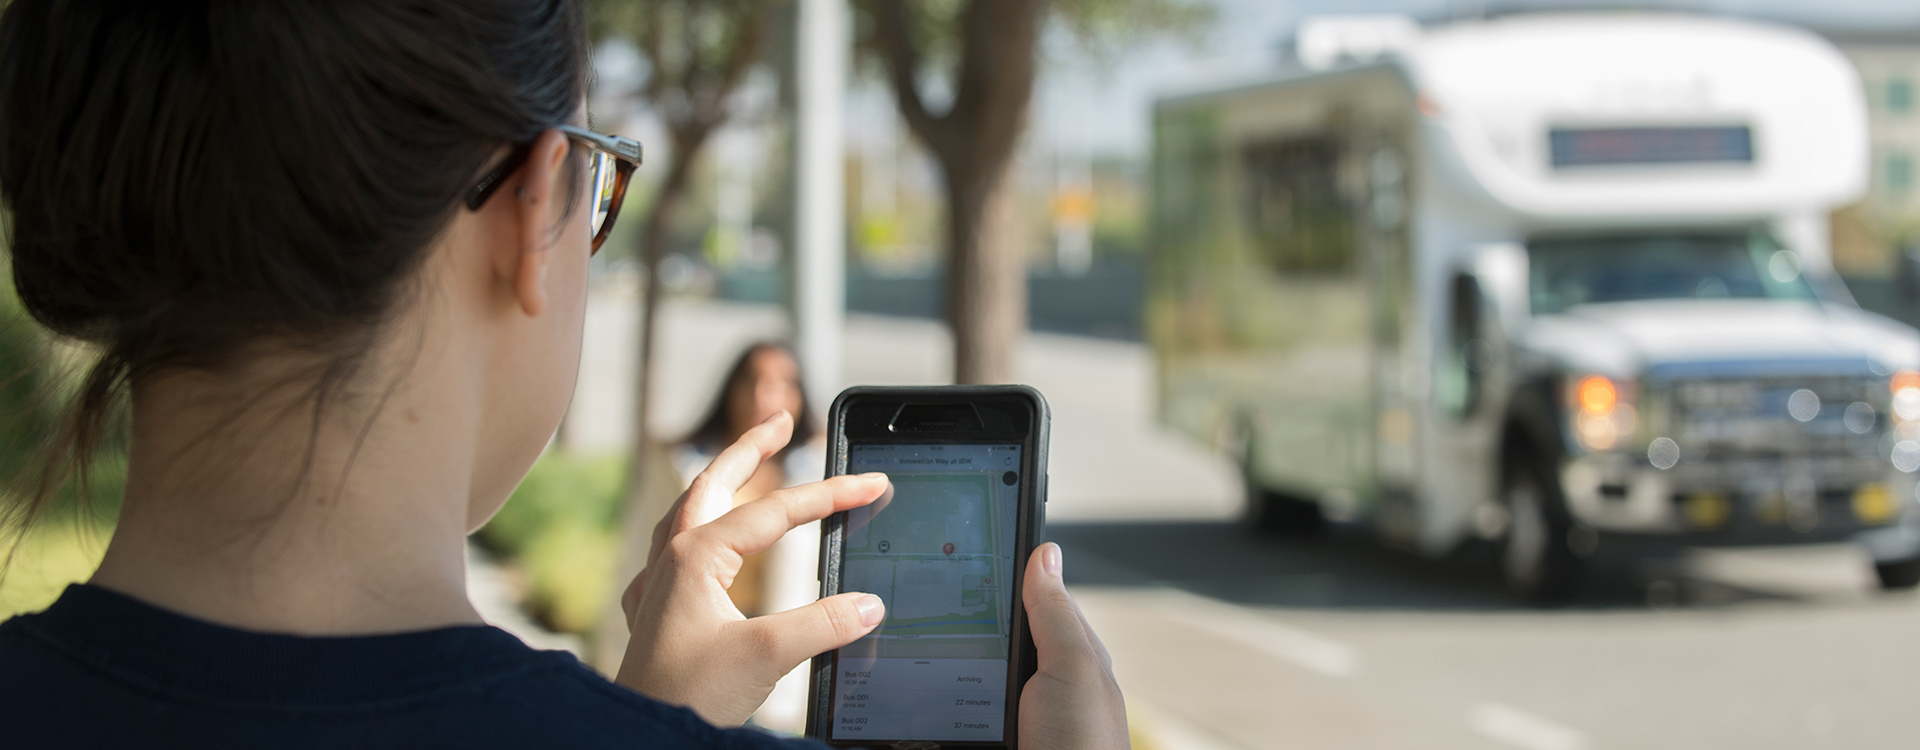 Student uses an app for transportation services.